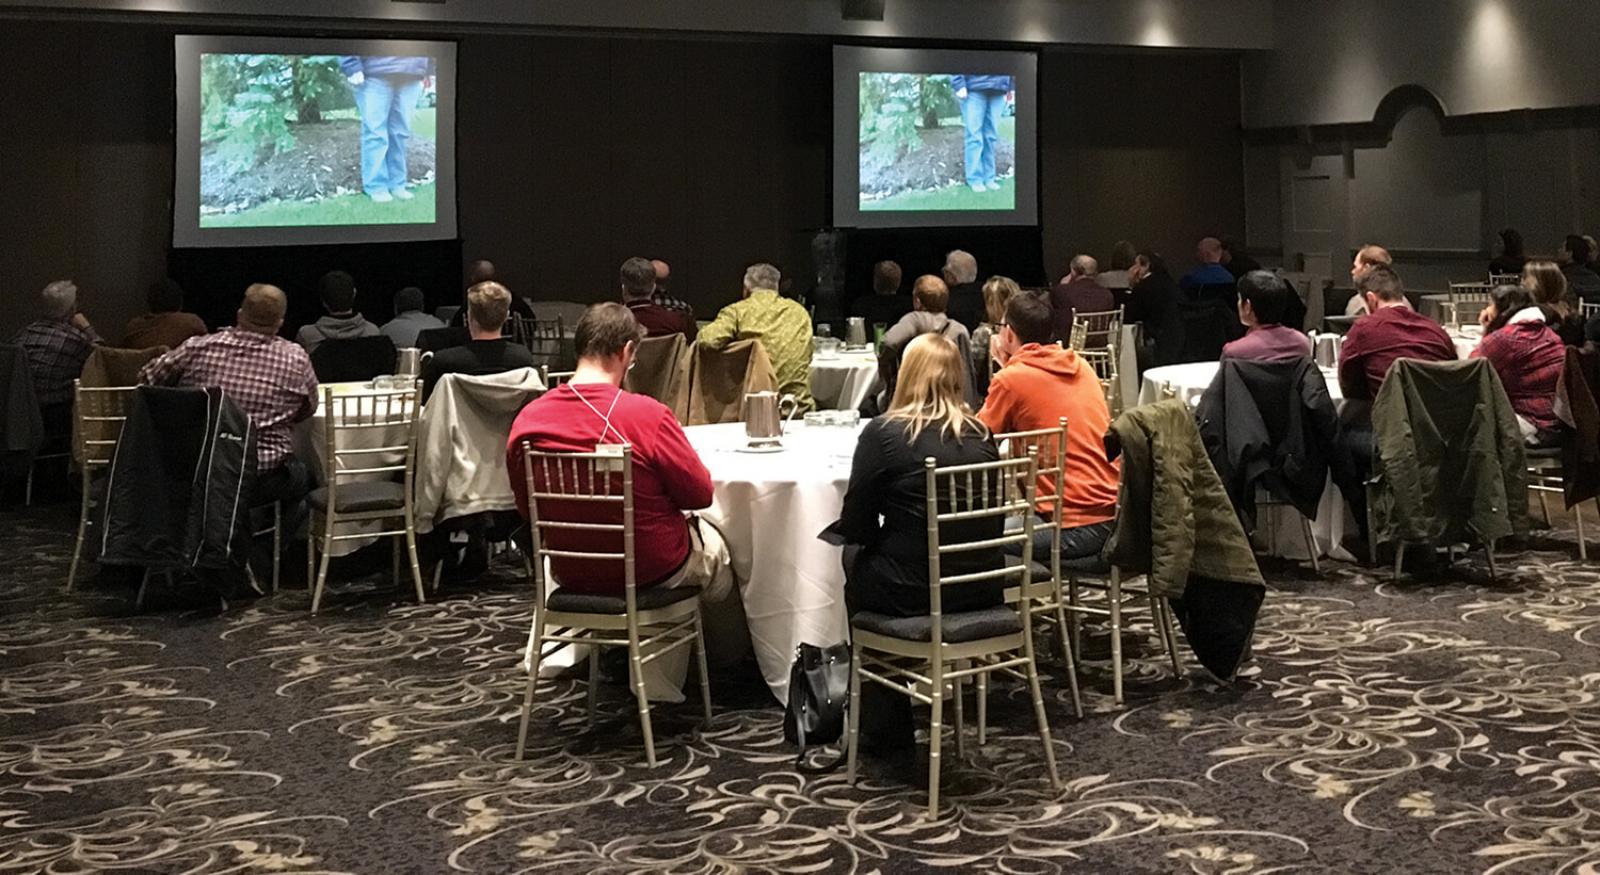 Landscape and grounds management contractors gathered to learn from each other at the annual lecture.